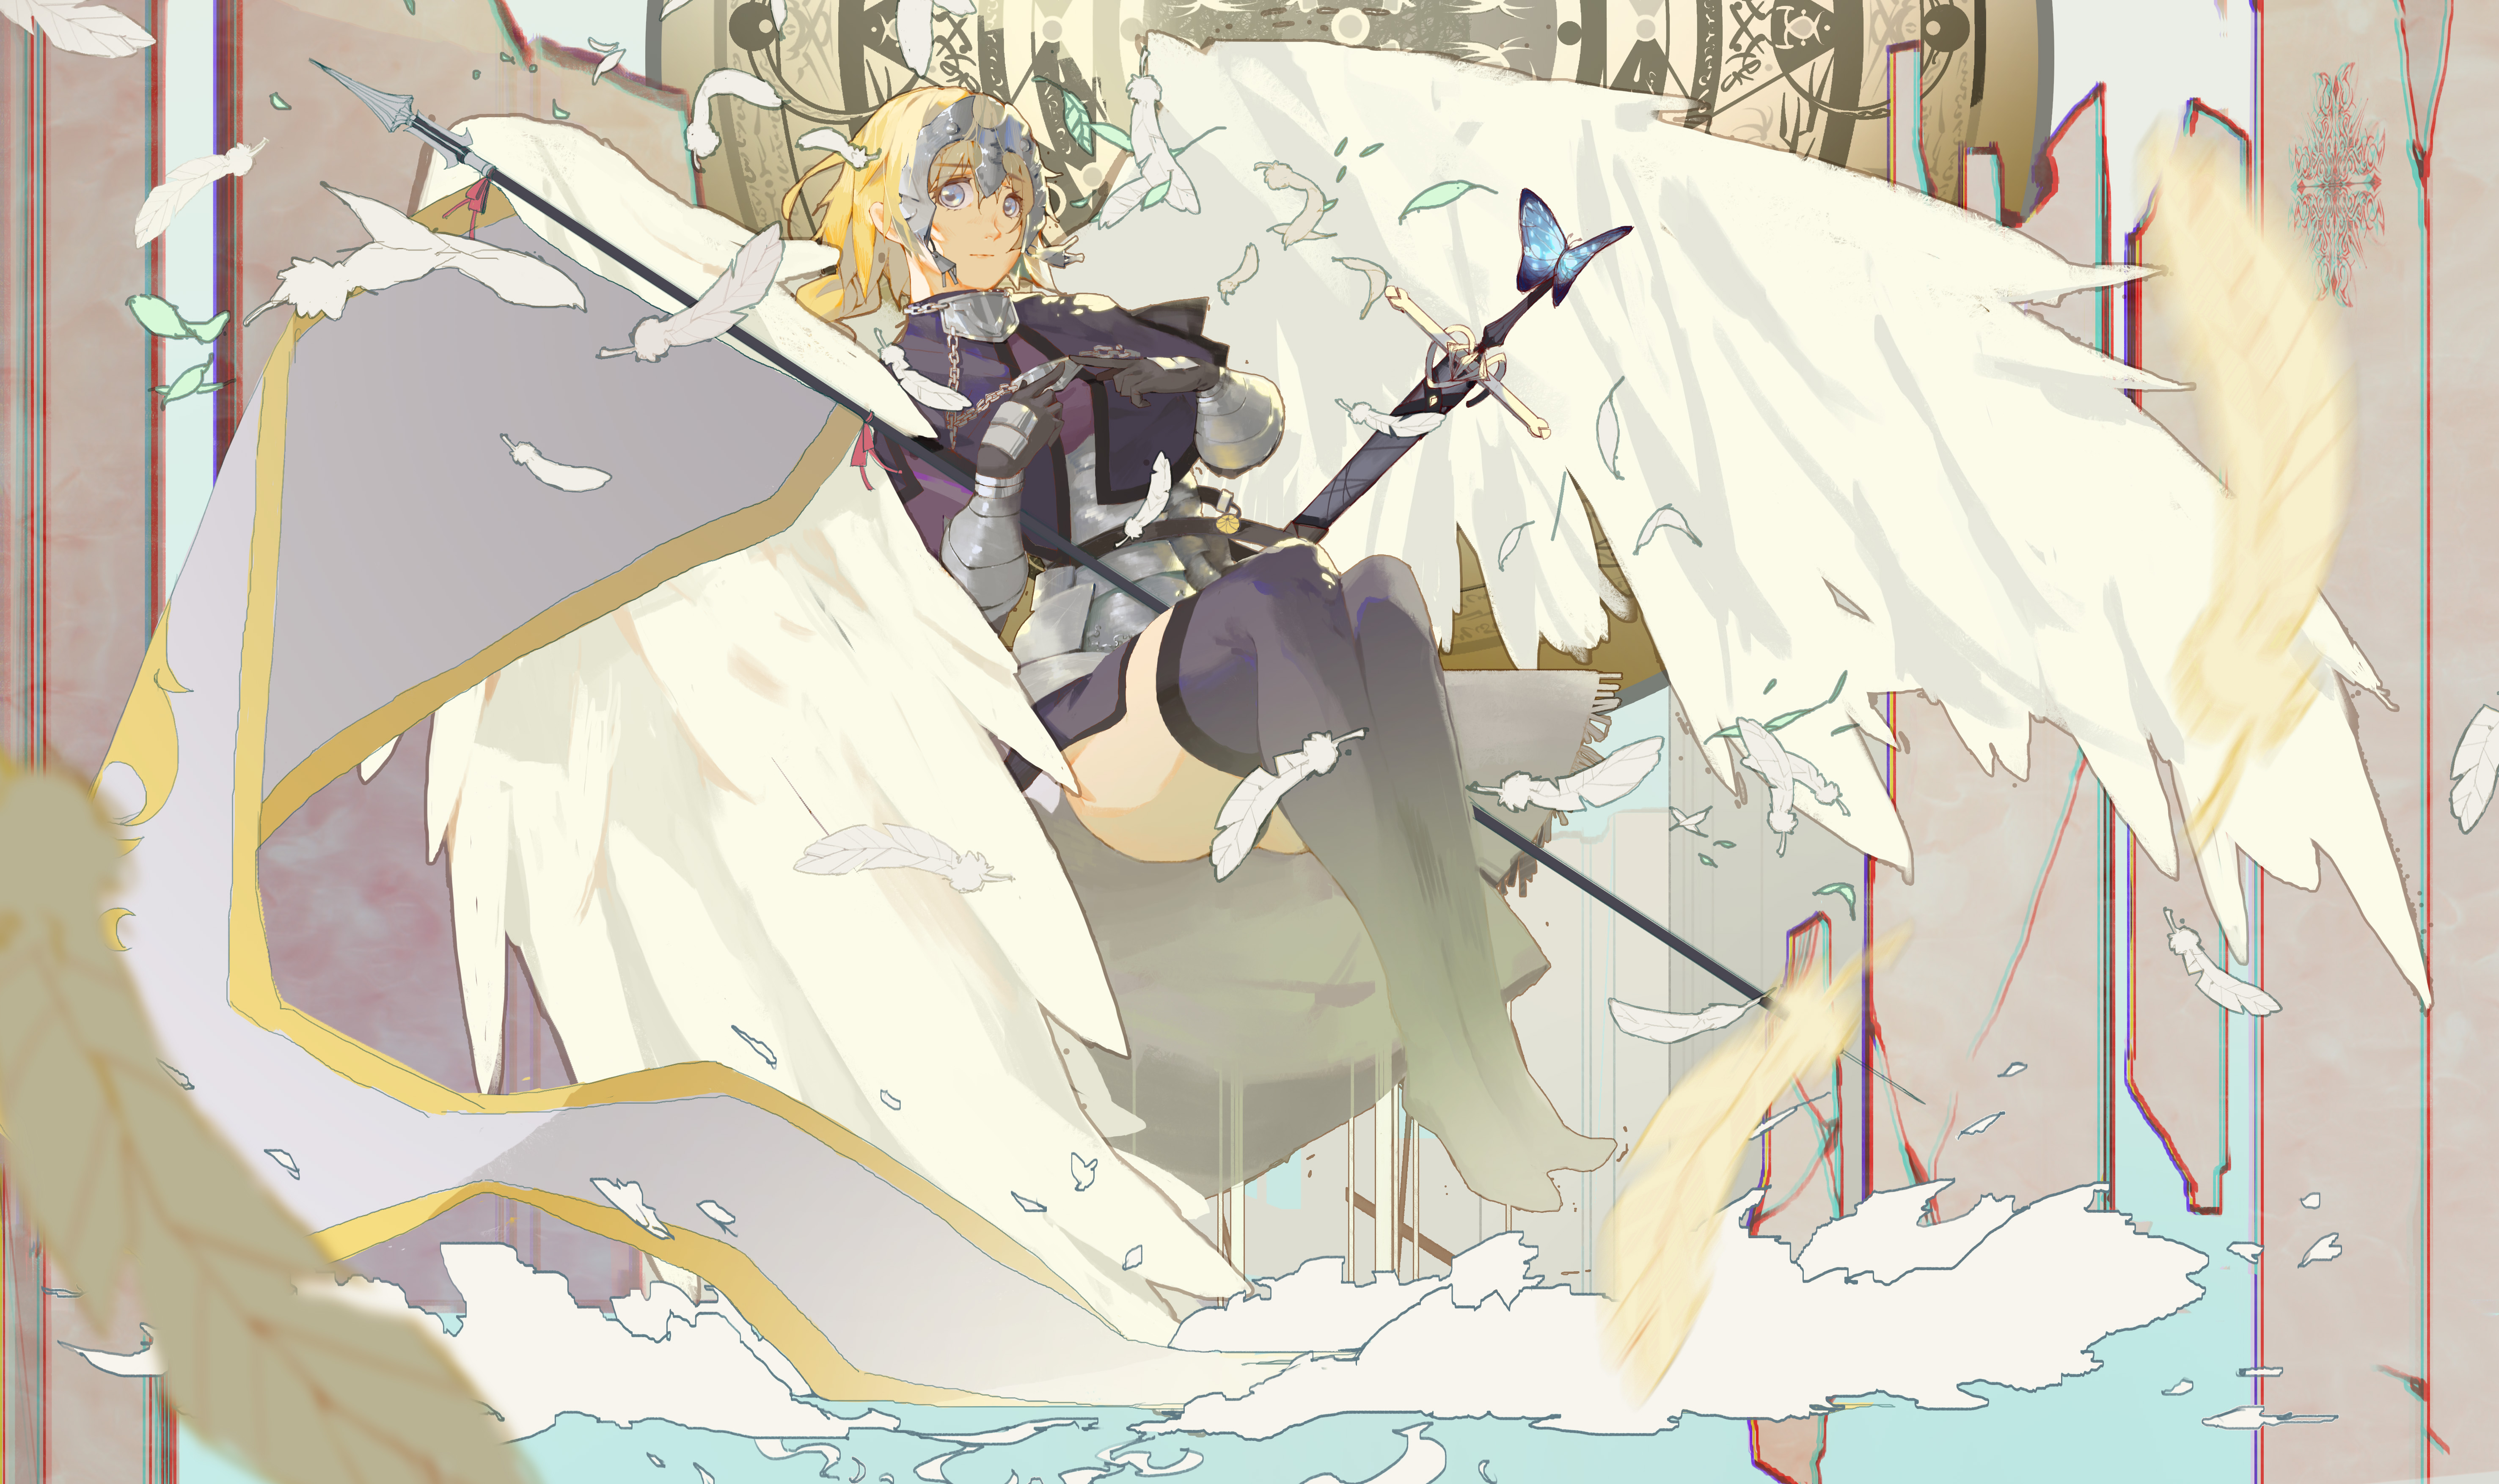 Anime 5906x3508 Fate series Fate/Apocrypha  anime girls female warrior women with swords thighs feathers angel wings Fate/Grand Order 2D armored woman anime big boobs blue eyes bangs long hair braided hair blue stockings gauntlets Jeanne d'Arc (Fate) Ruler (Fate/Apocrypha) looking at viewer glutes curvy fan art floating strategic covering blonde